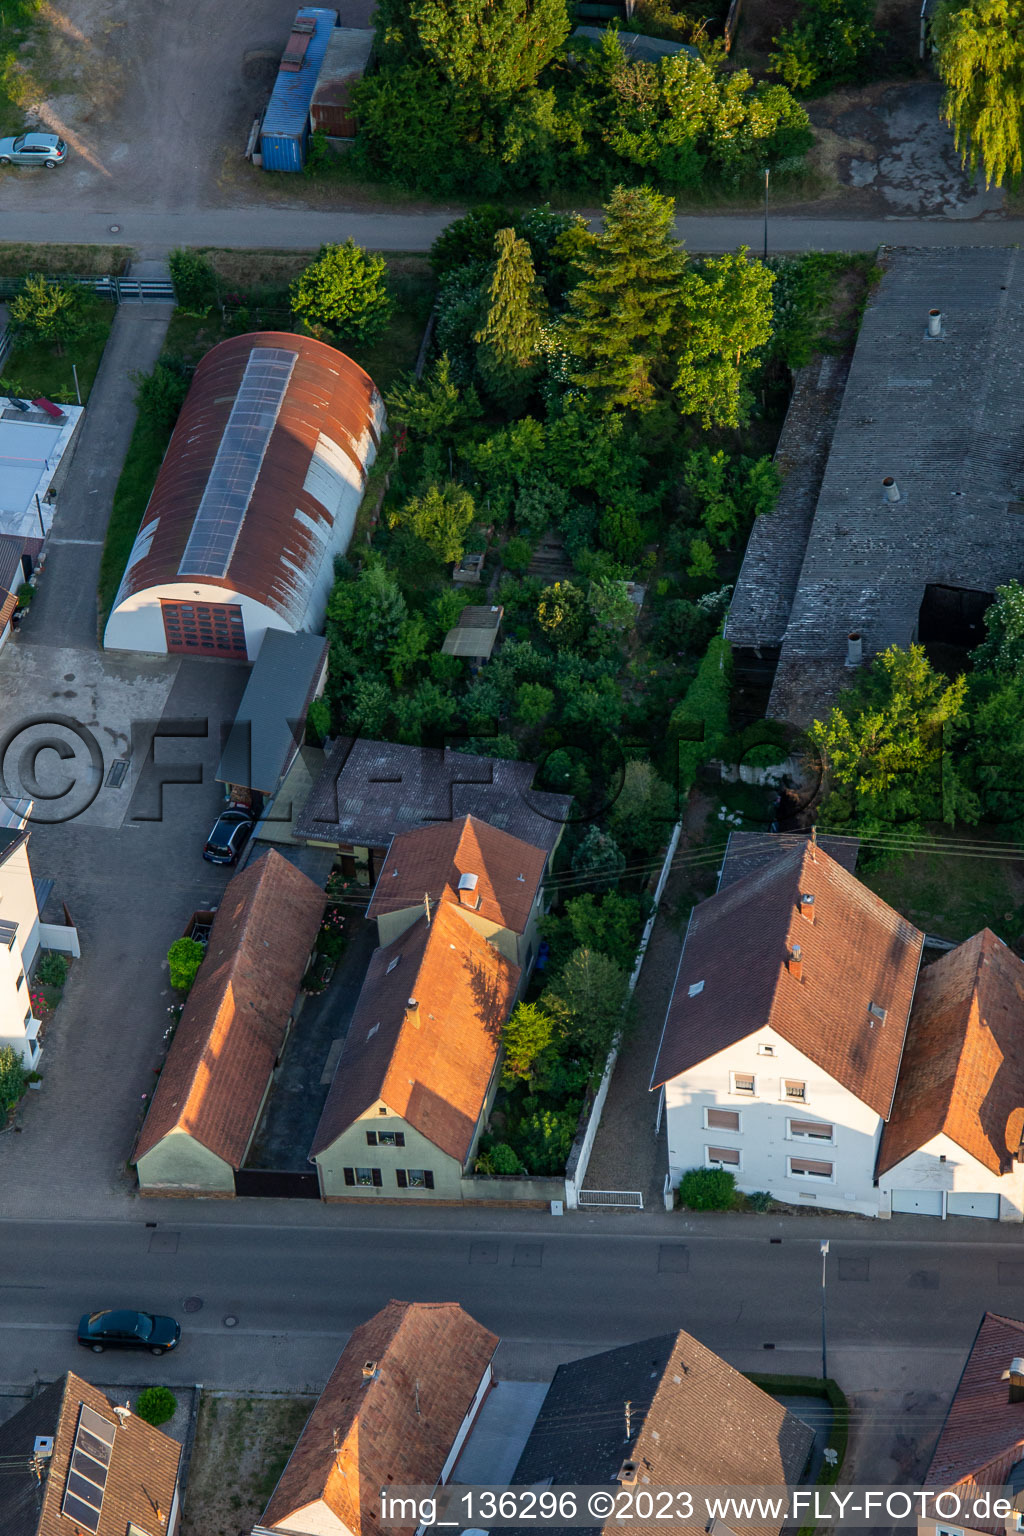 Drone image of Saarstr in Kandel in the state Rhineland-Palatinate, Germany